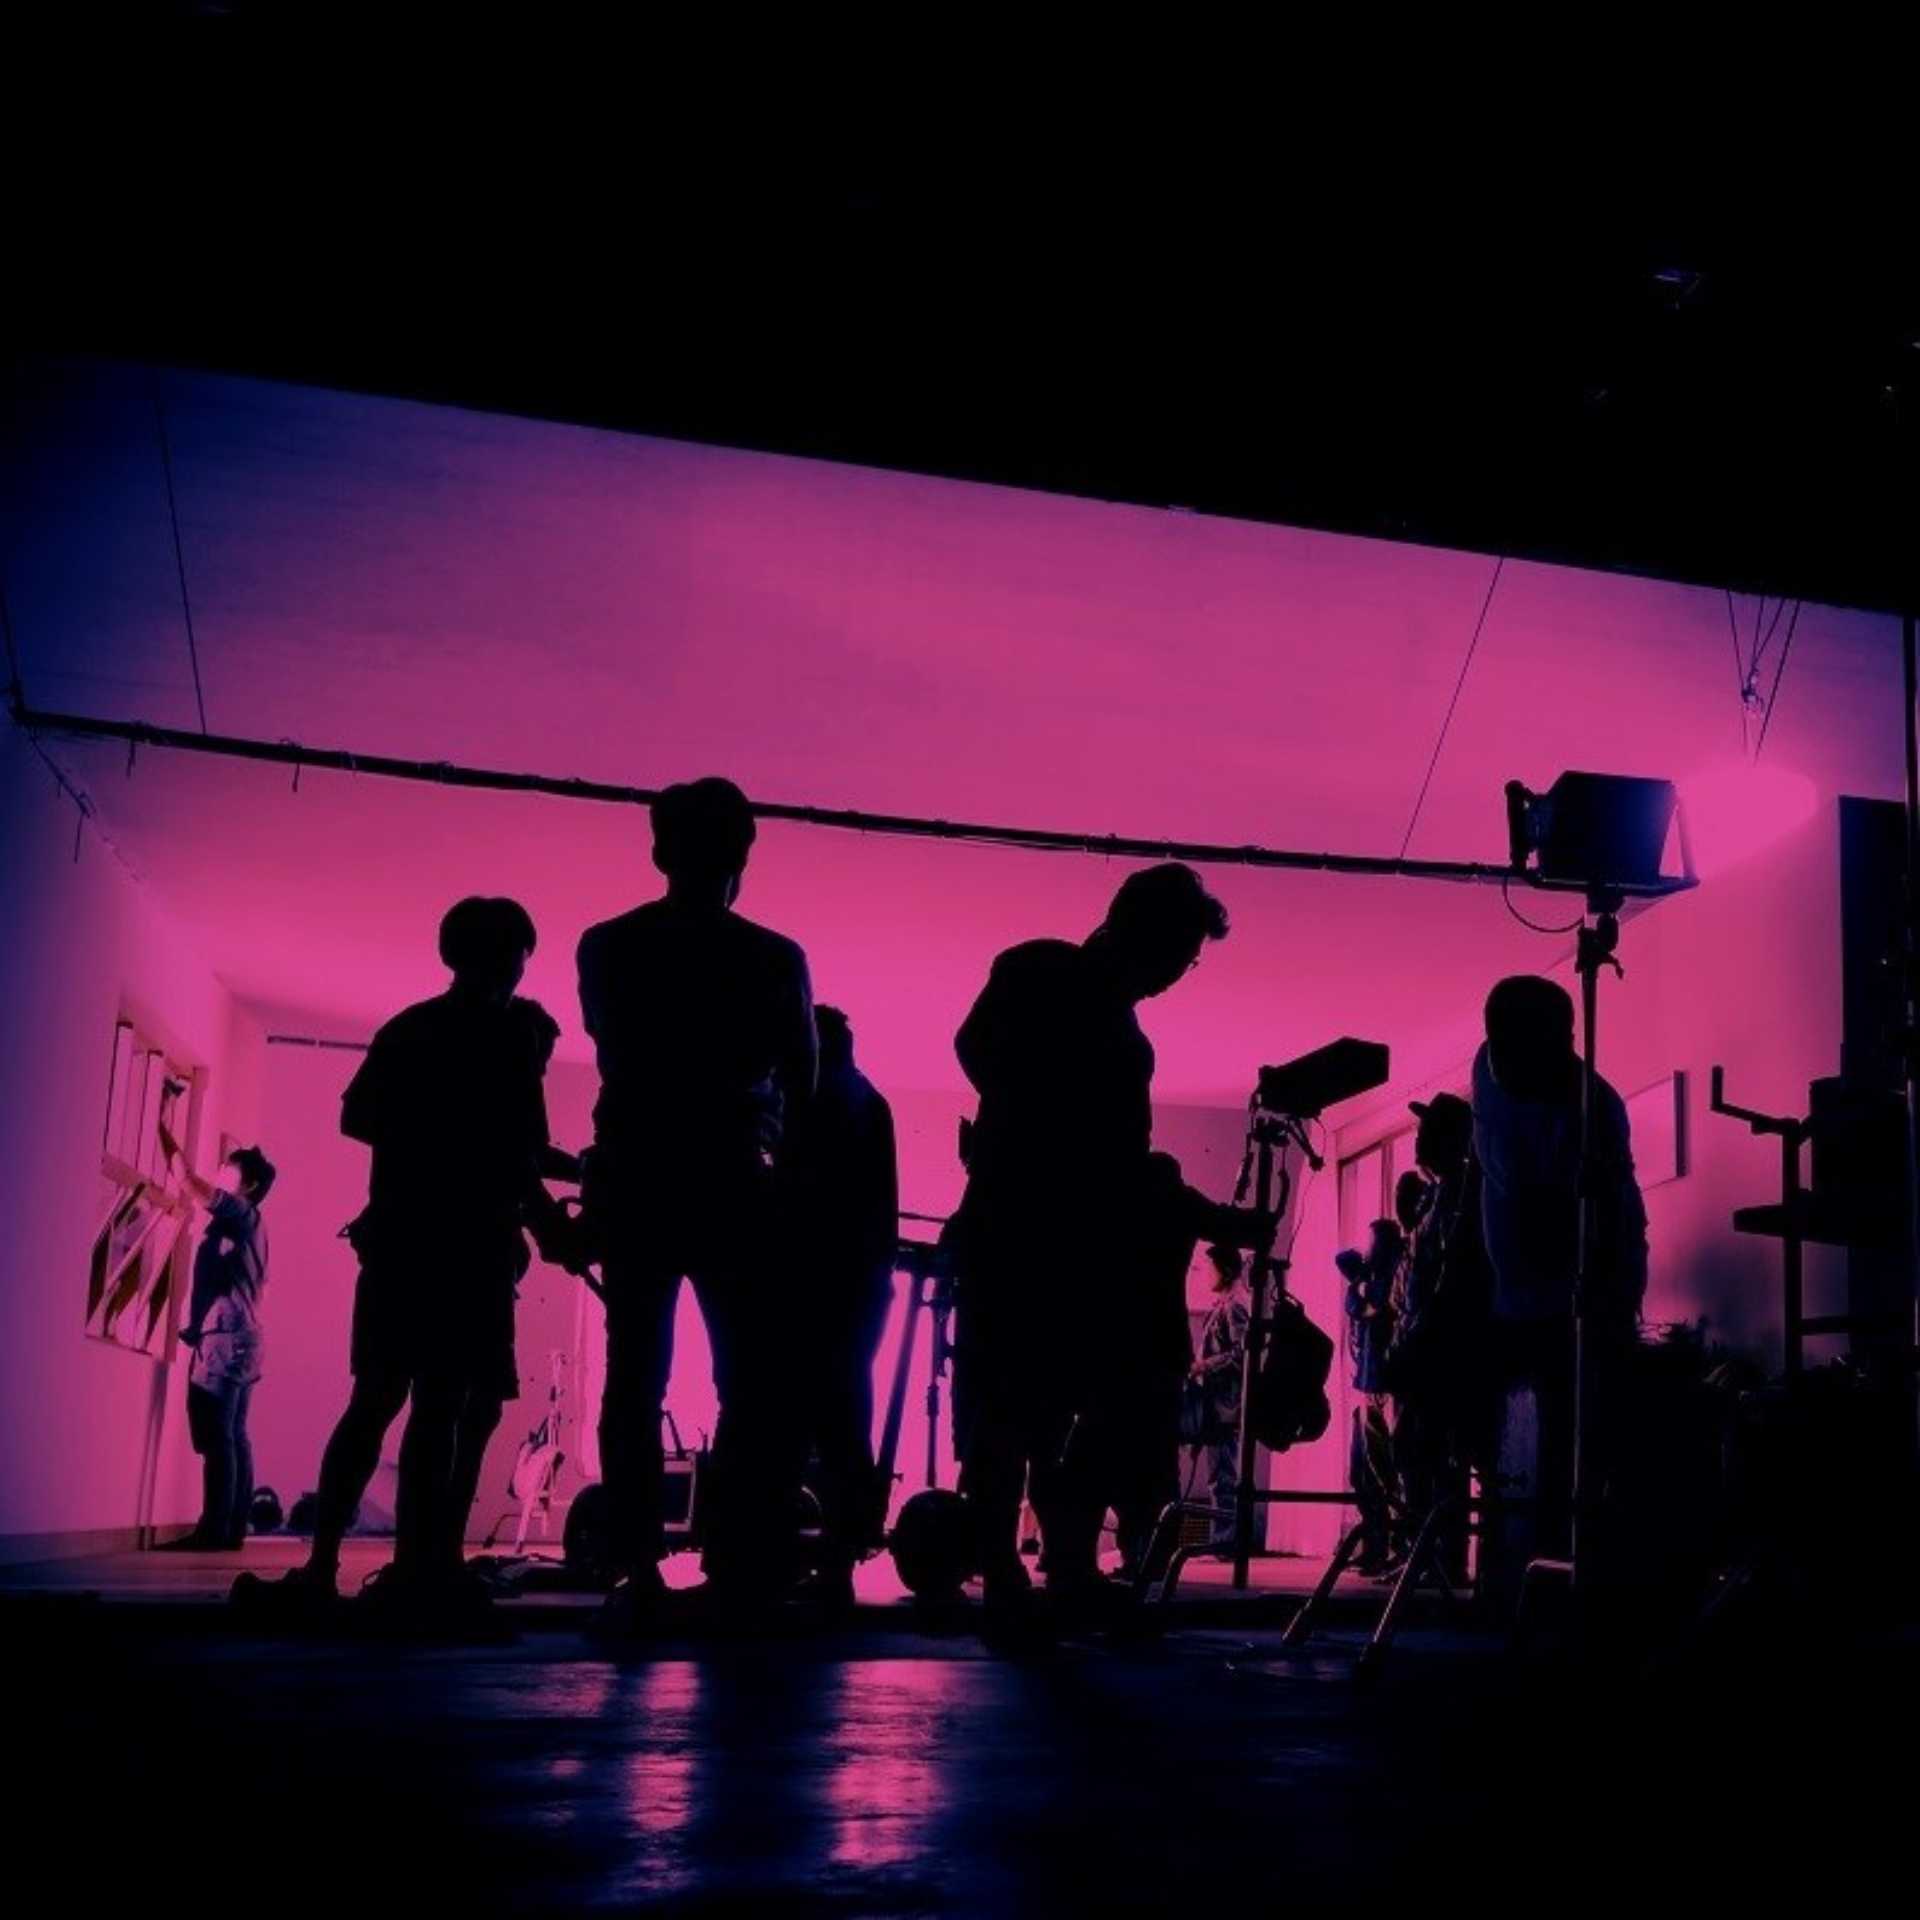 Silhouette of a band